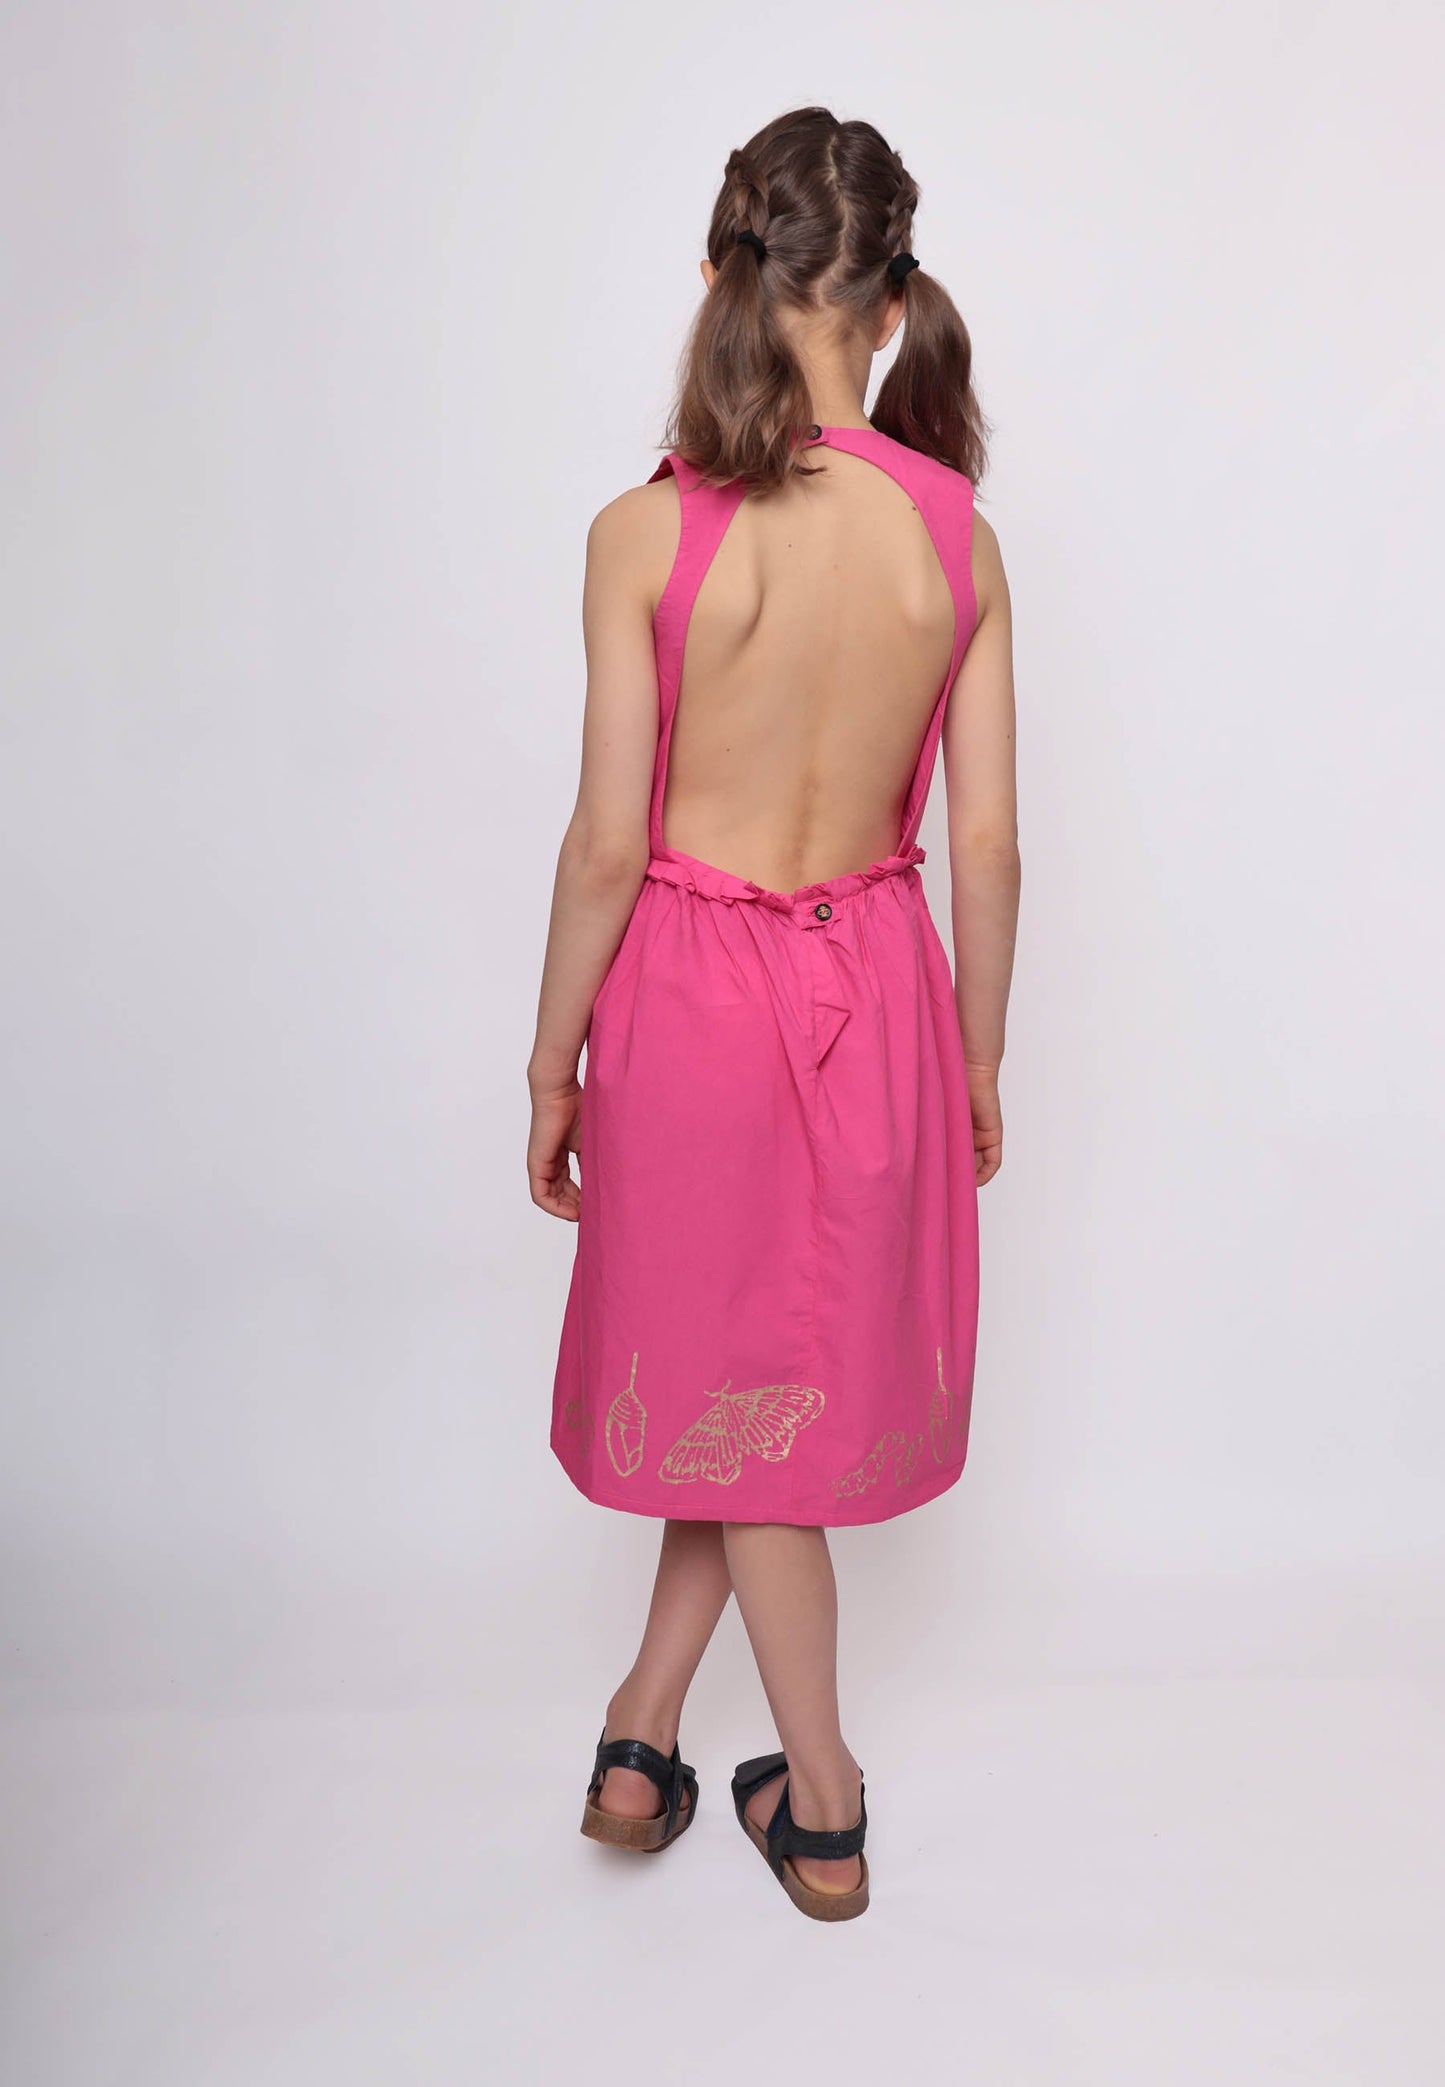 Hot Pink Dress with Cutout Back and Hand Block Print